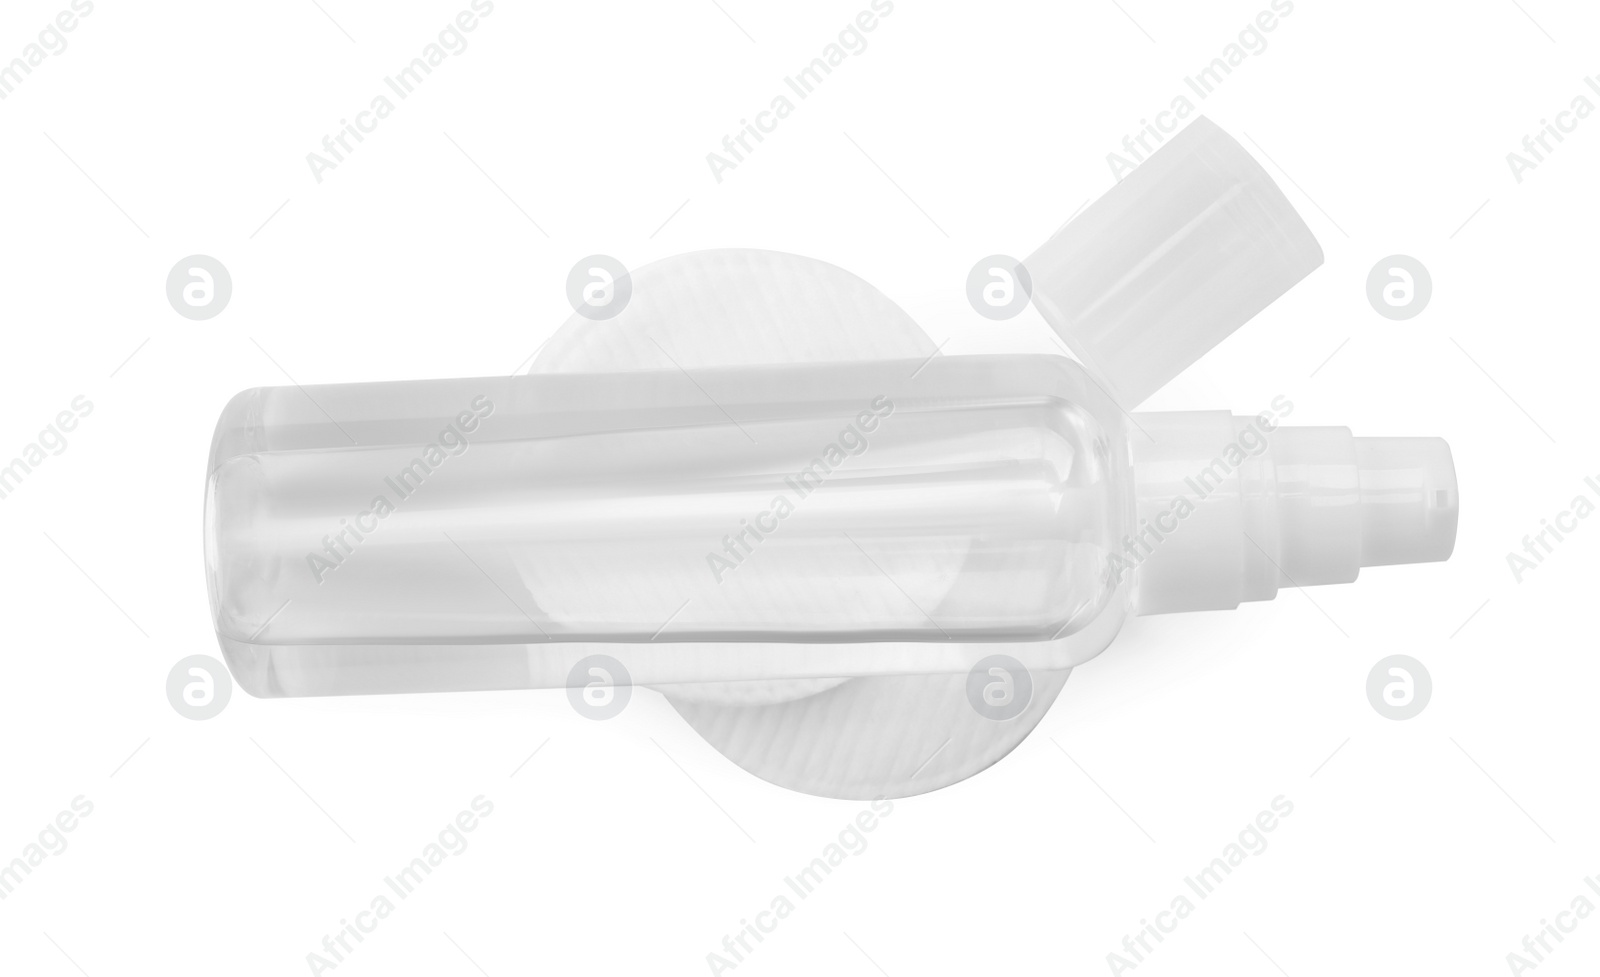 Photo of Bottle of micellar cleansing water and cotton pads on white background, top view